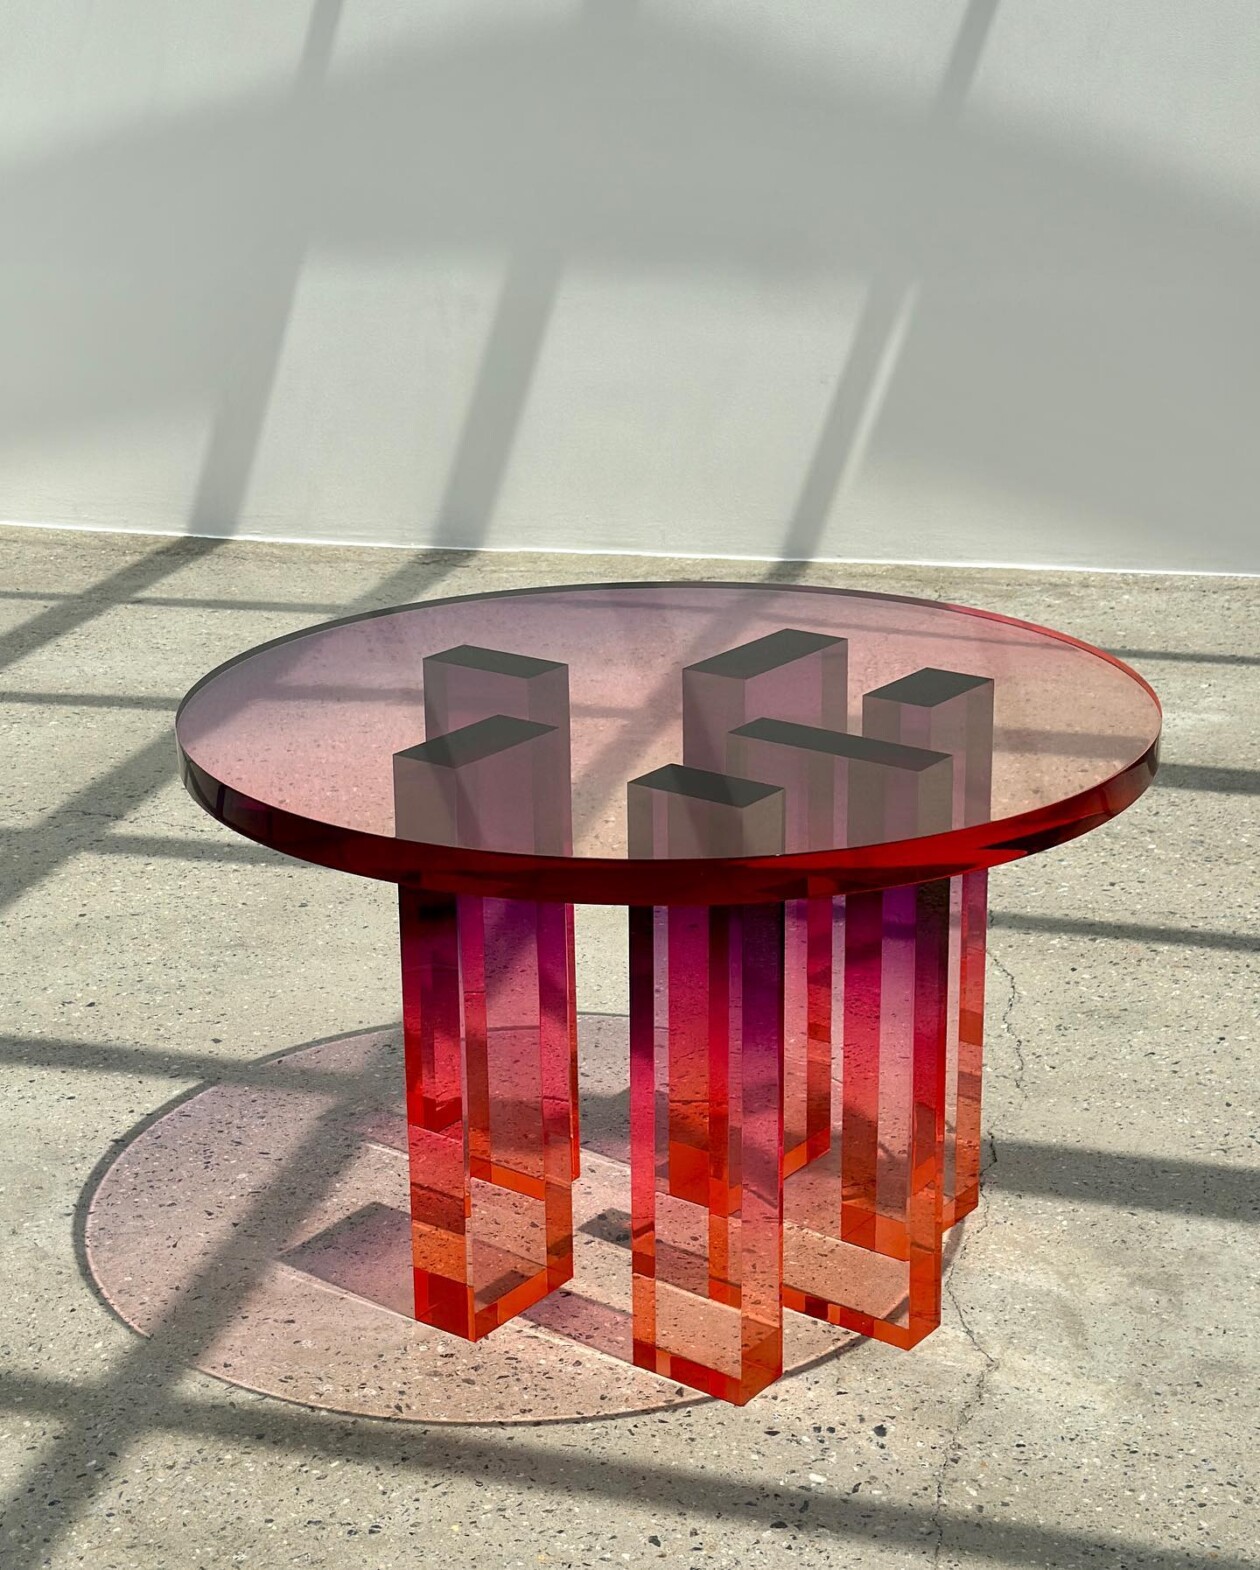 Gorgeous Sculptural Furniture Made Of Gradient Acrylic By South Korean Artist Saerom Yoon (15)